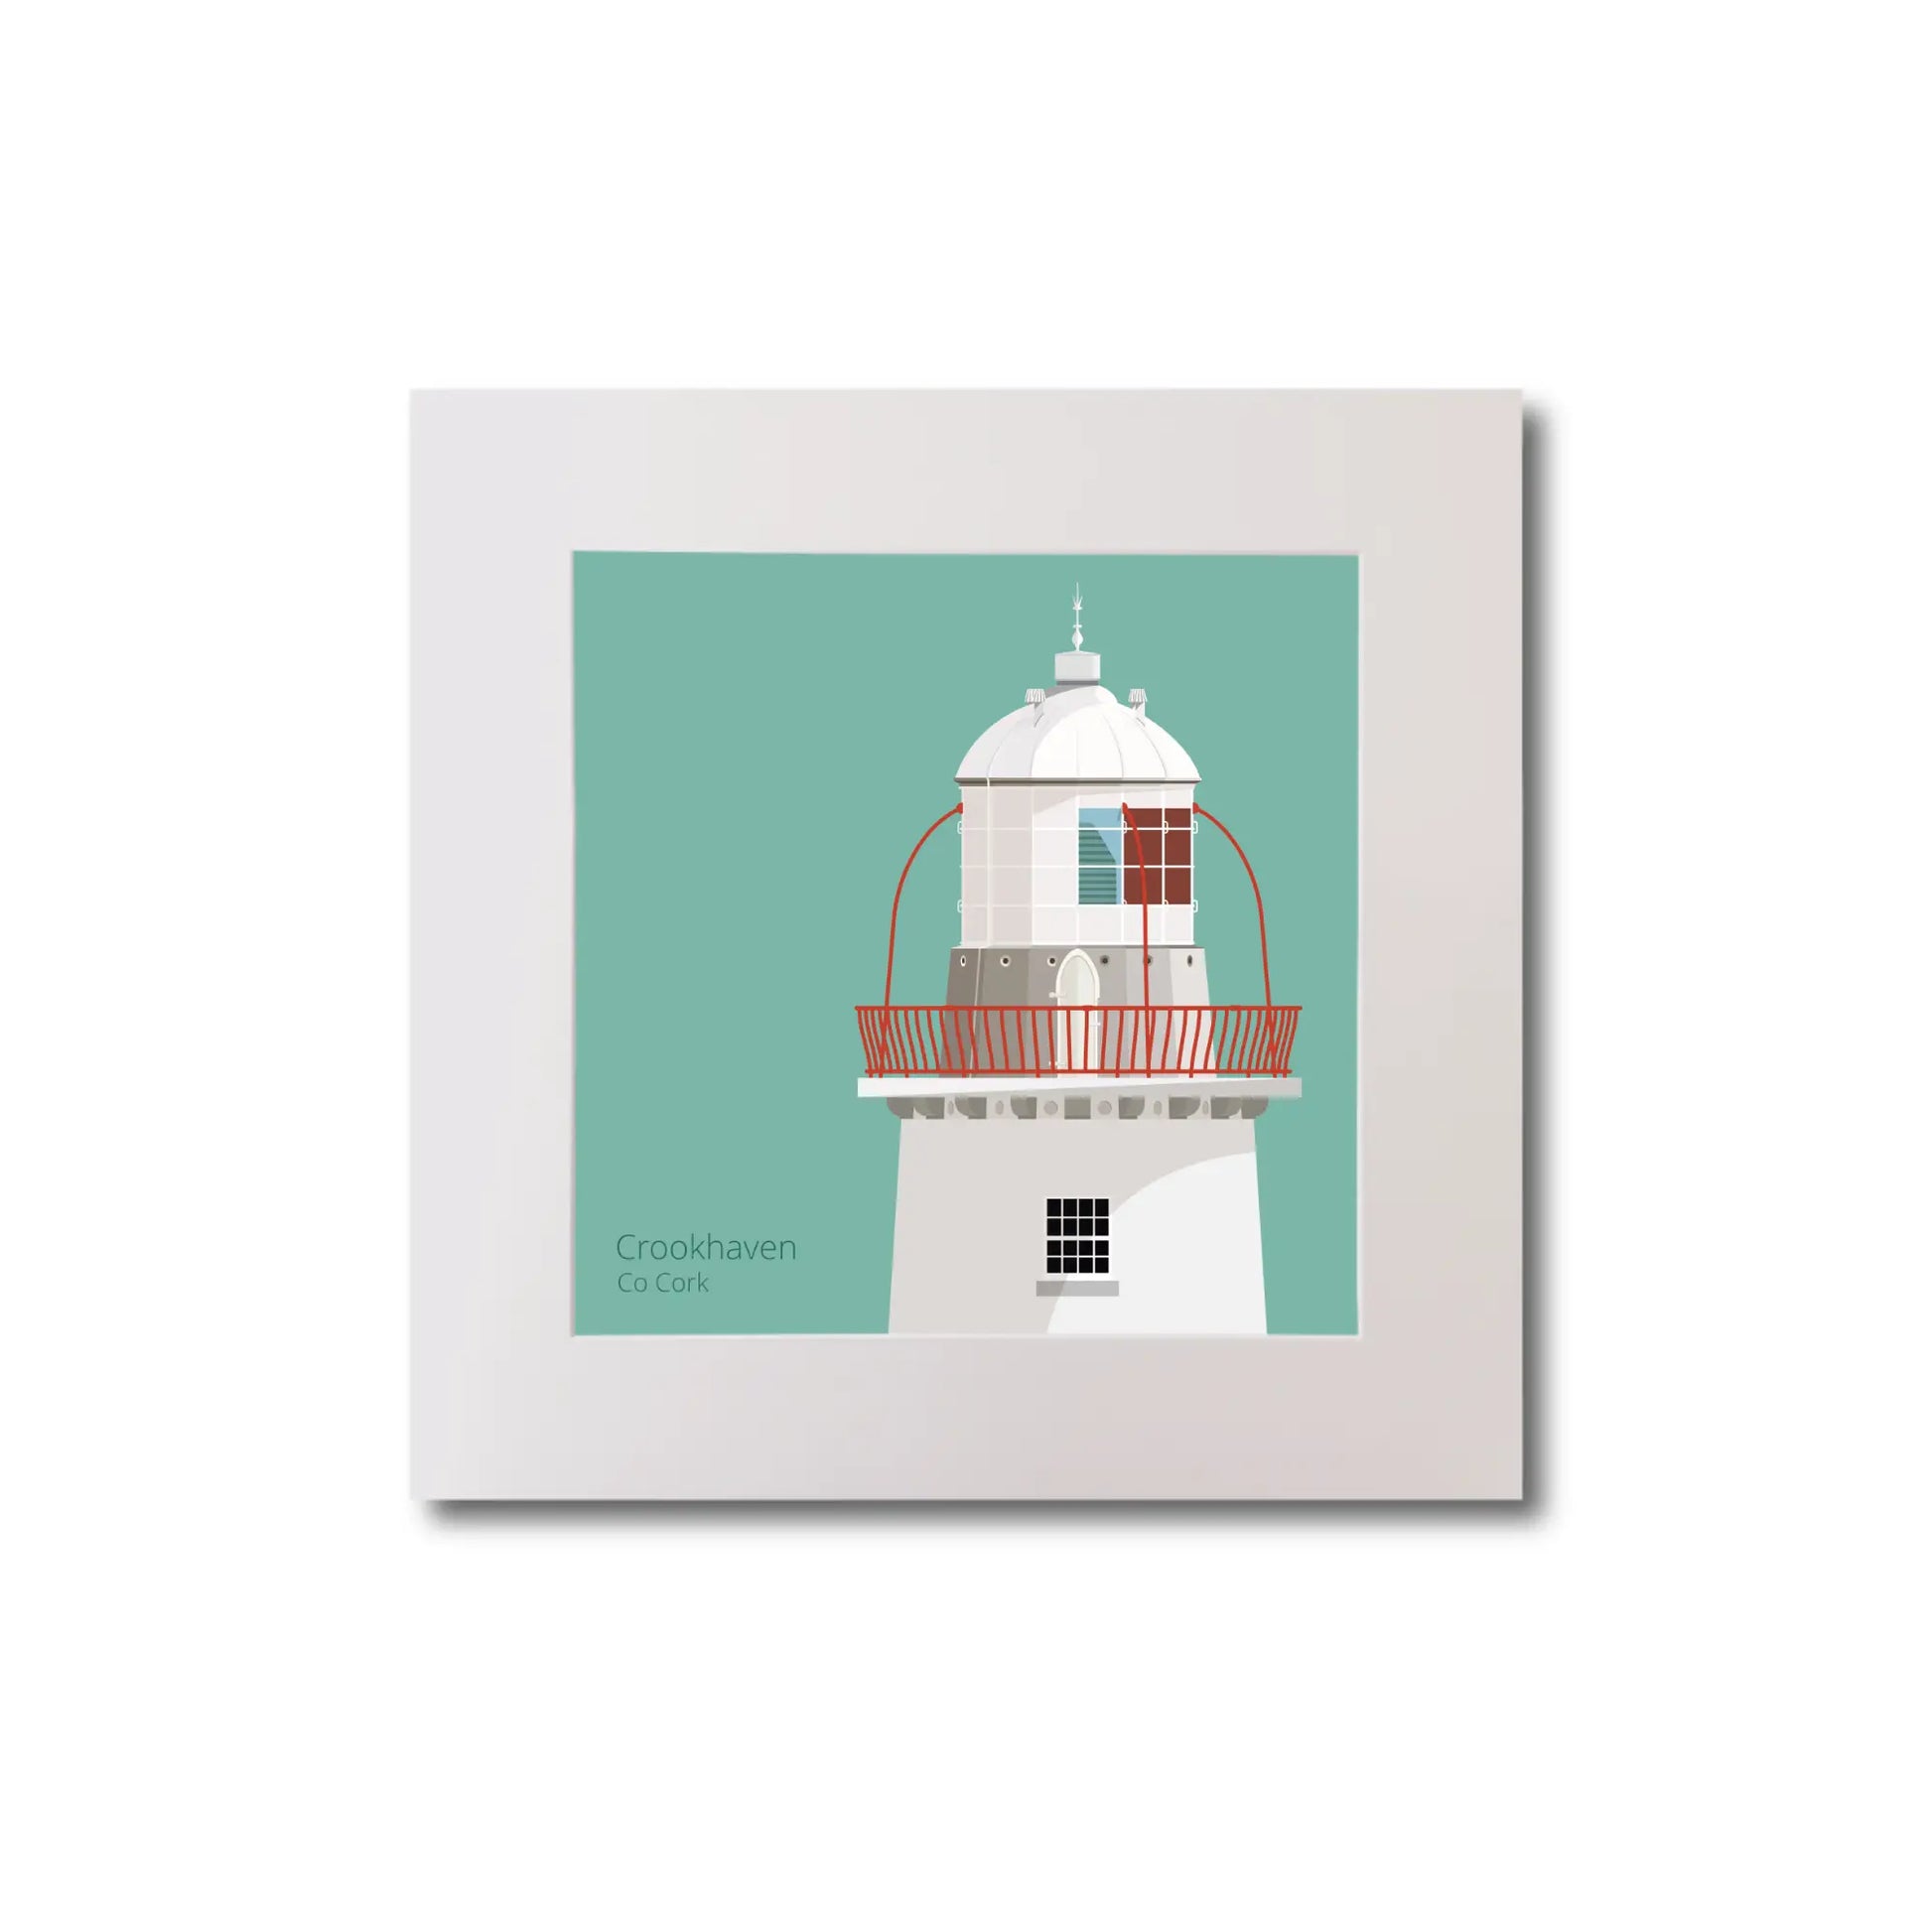 Illustration of Crookhaven lighthouse on an ocean green background, mounted and measuring 20x20cm.